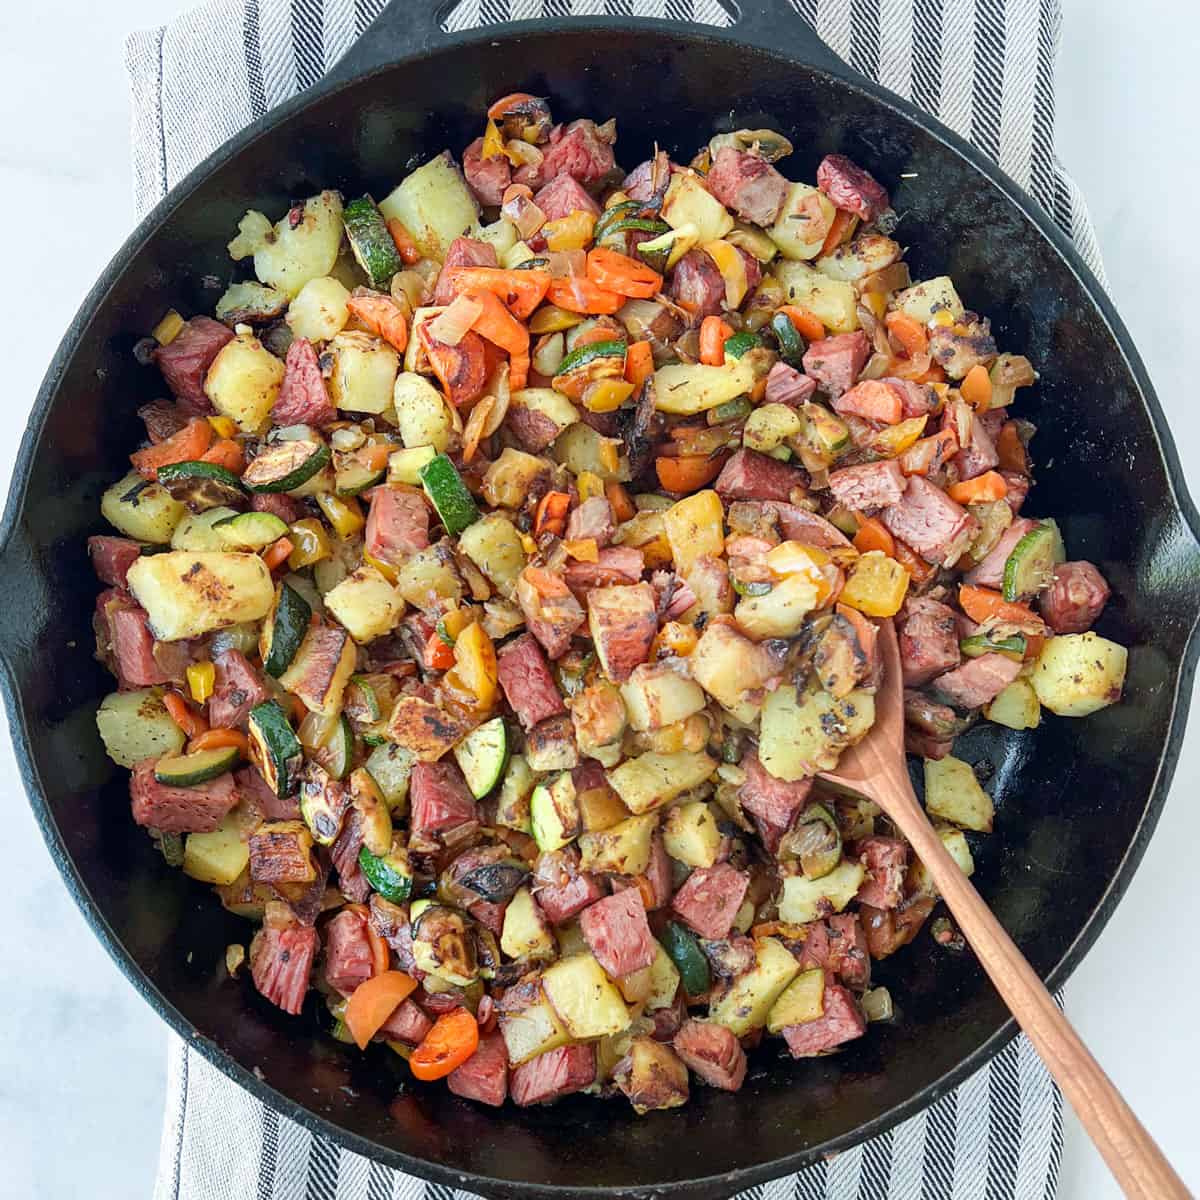 Corned beef has in a cast iron skillet with a wooden spoon.